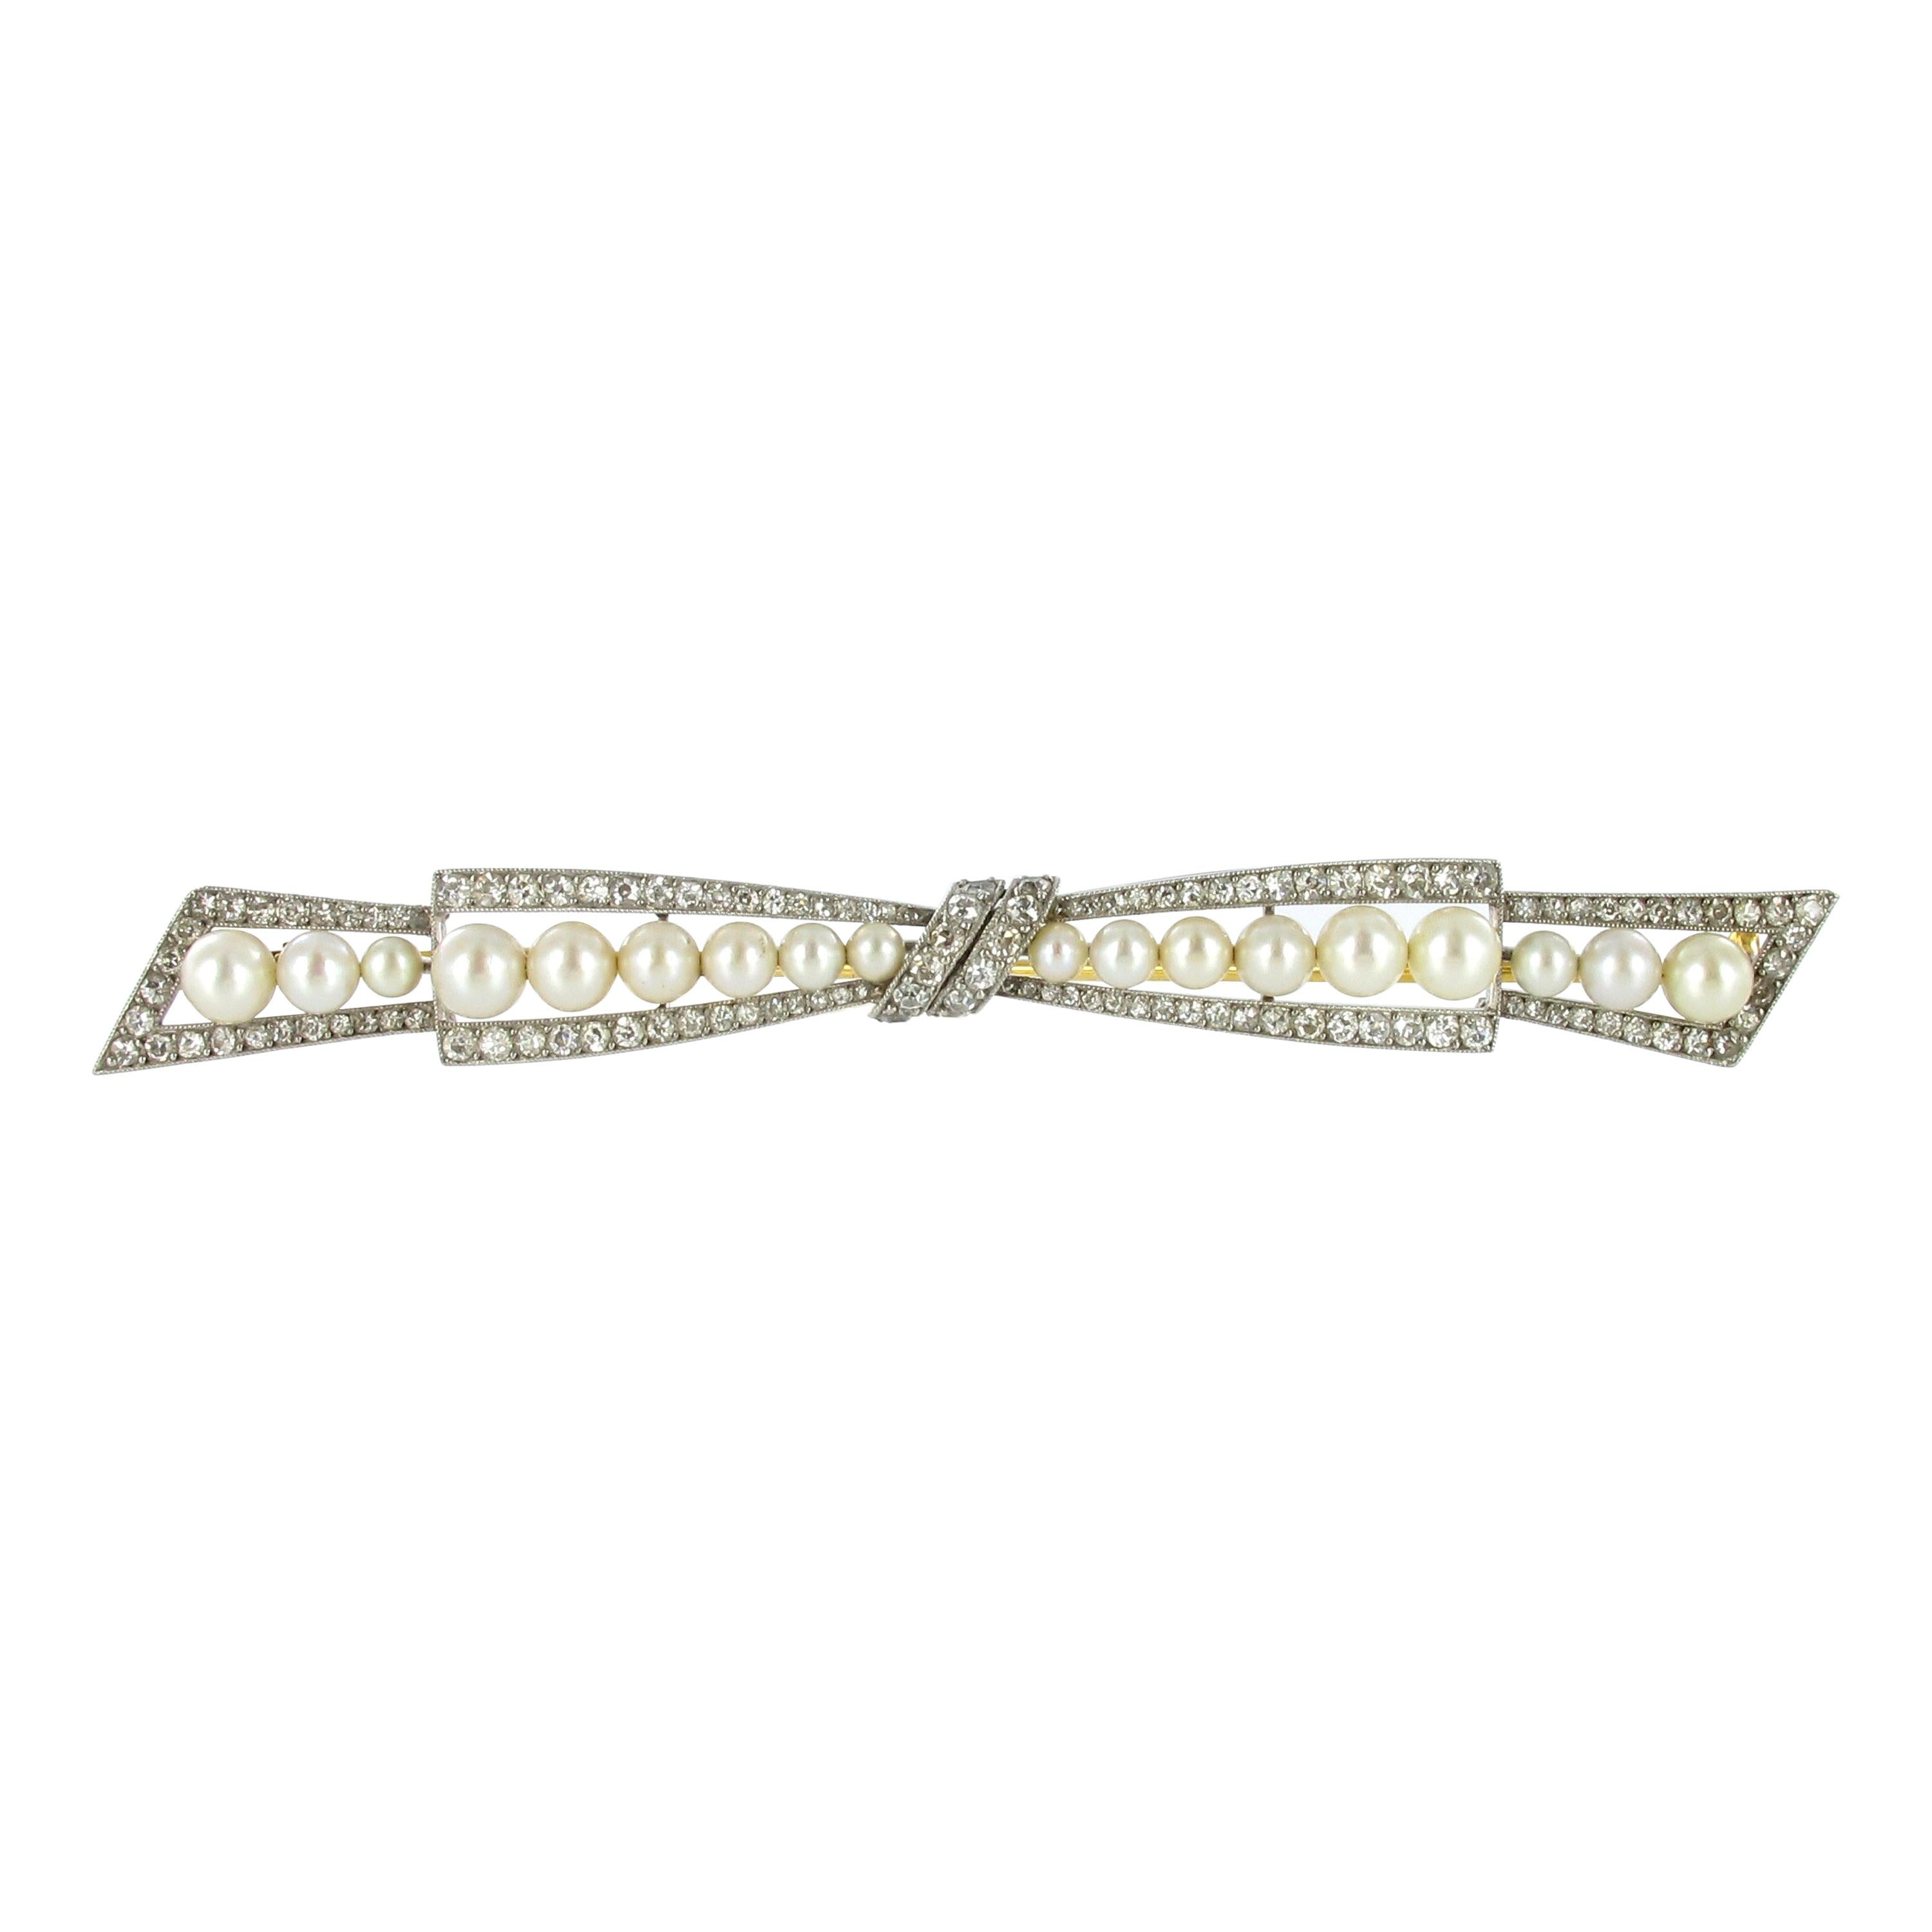 Beautiful Bow Brooch with Natural Pearls and Diamonds in Platinum and Gold